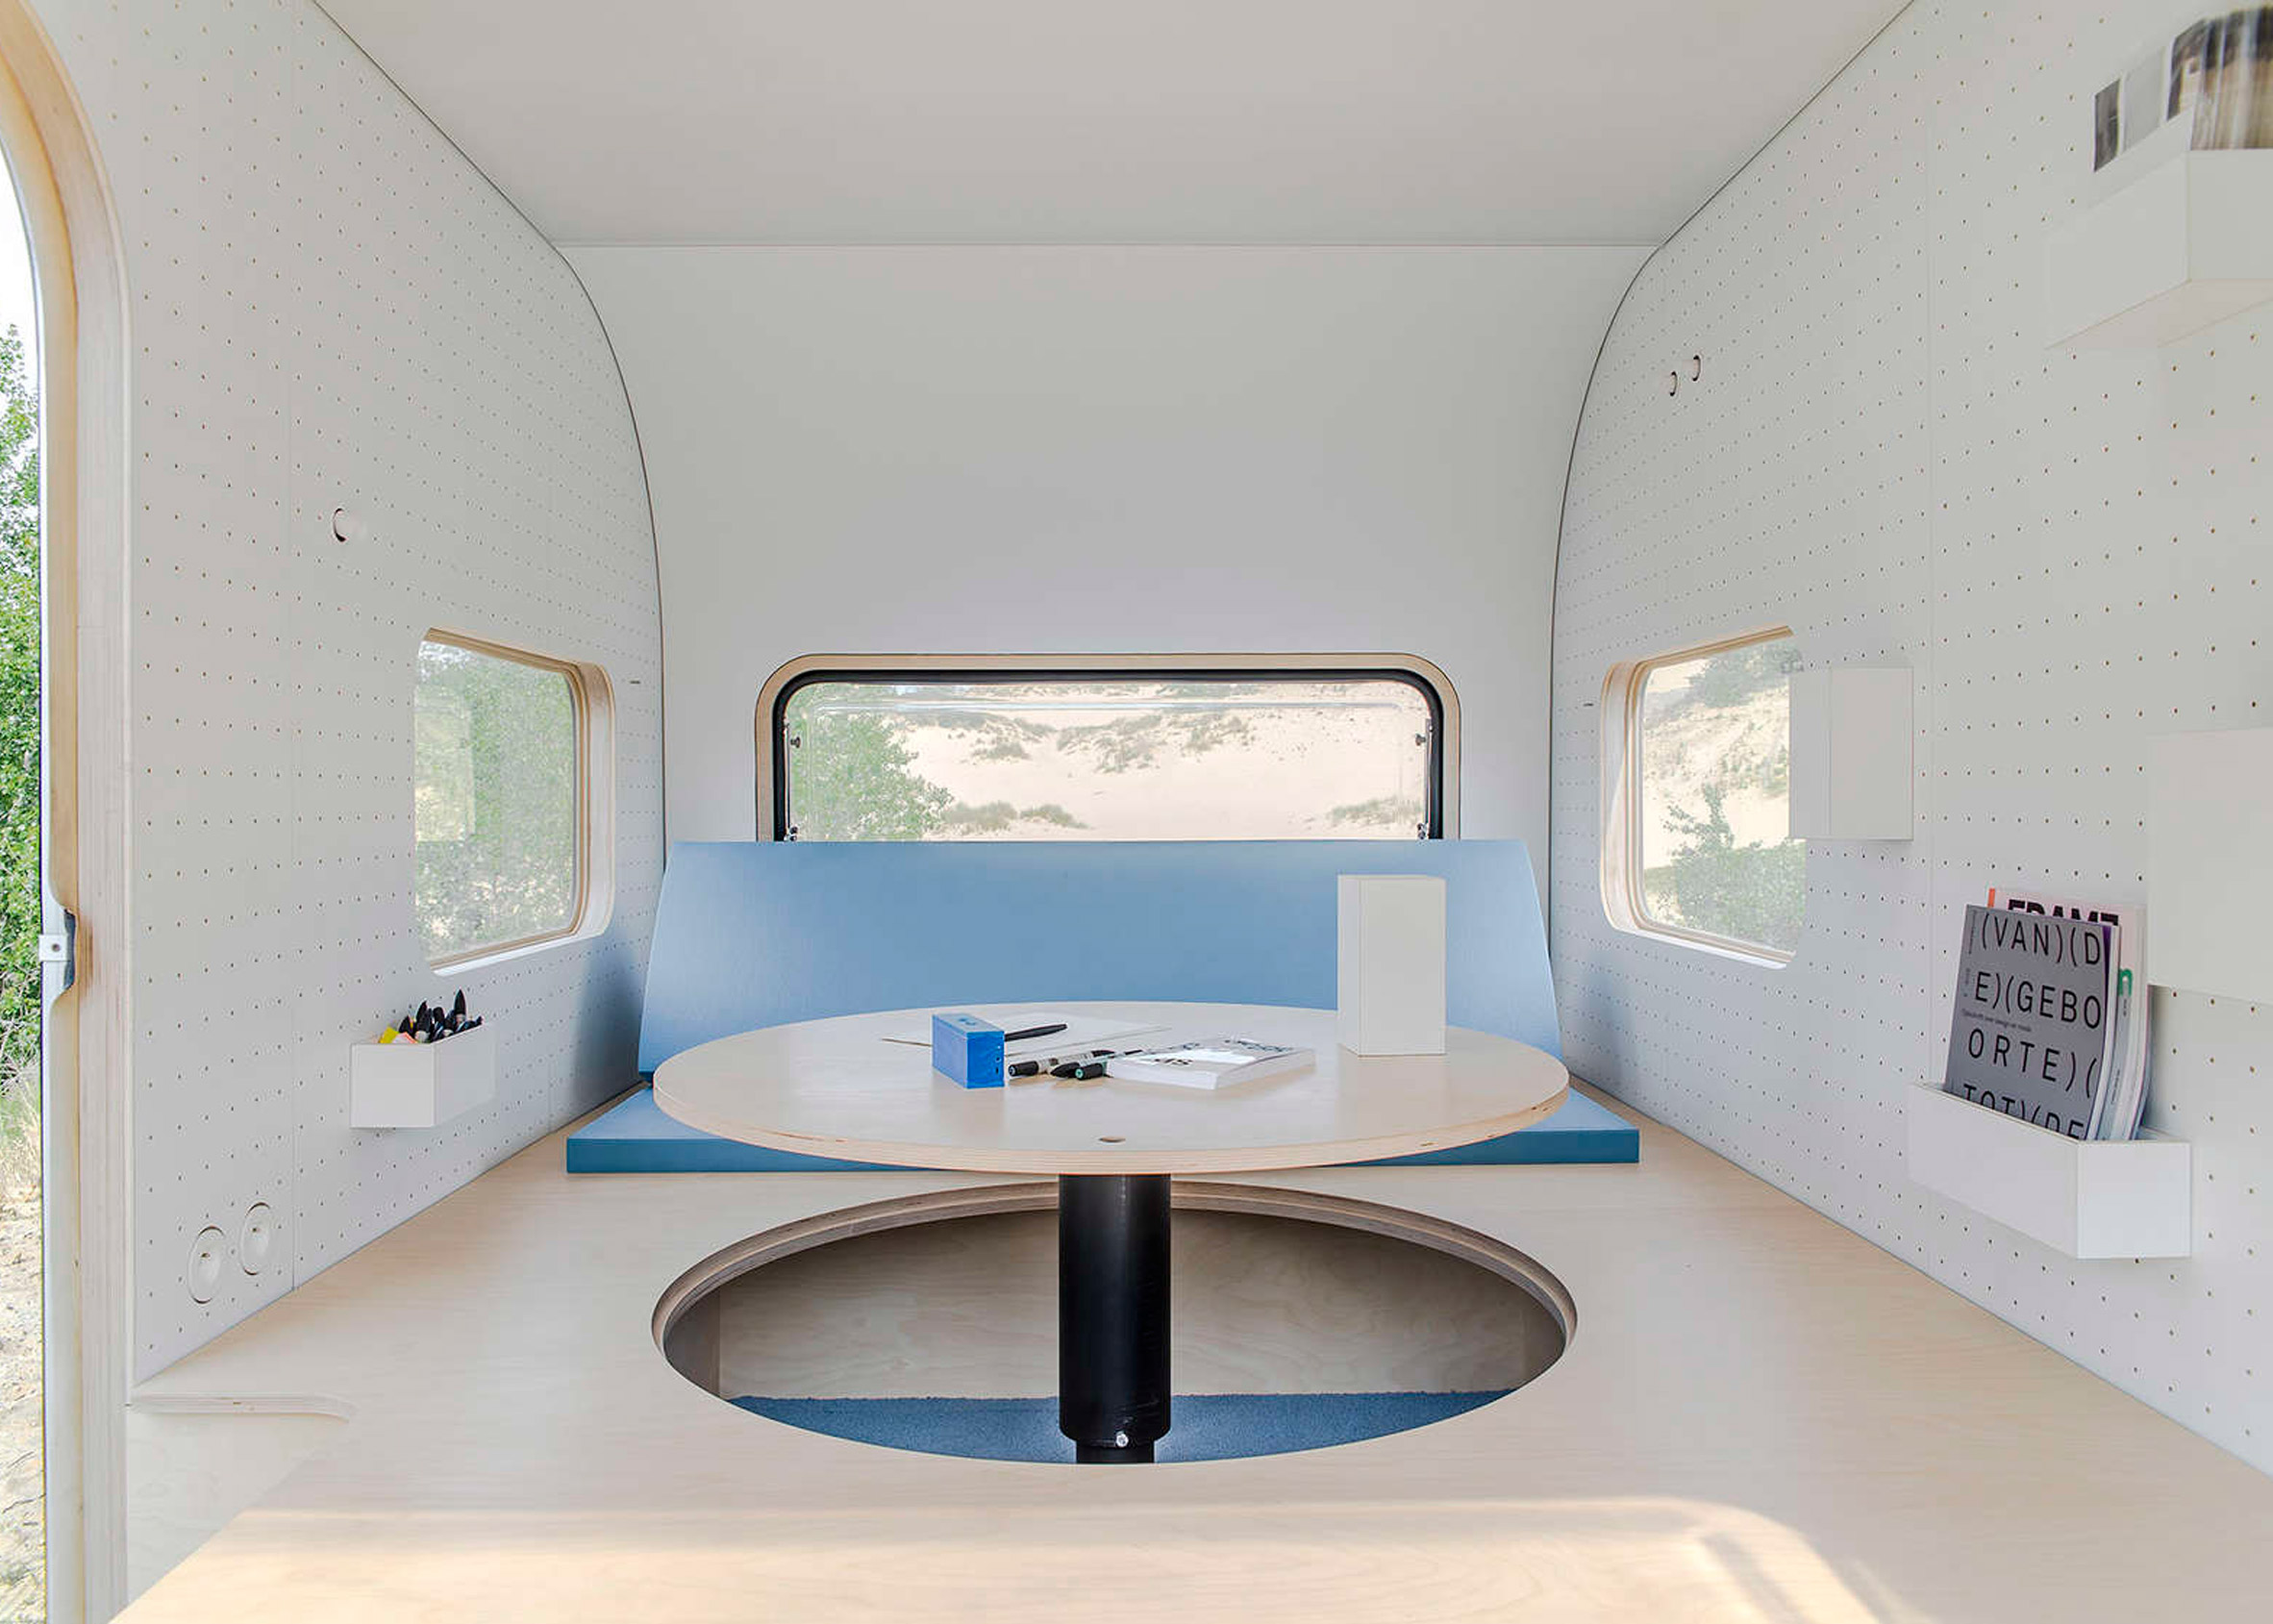 Five Am Turns Caravan Into Studio With Pop Up Table And Pegboard Walls